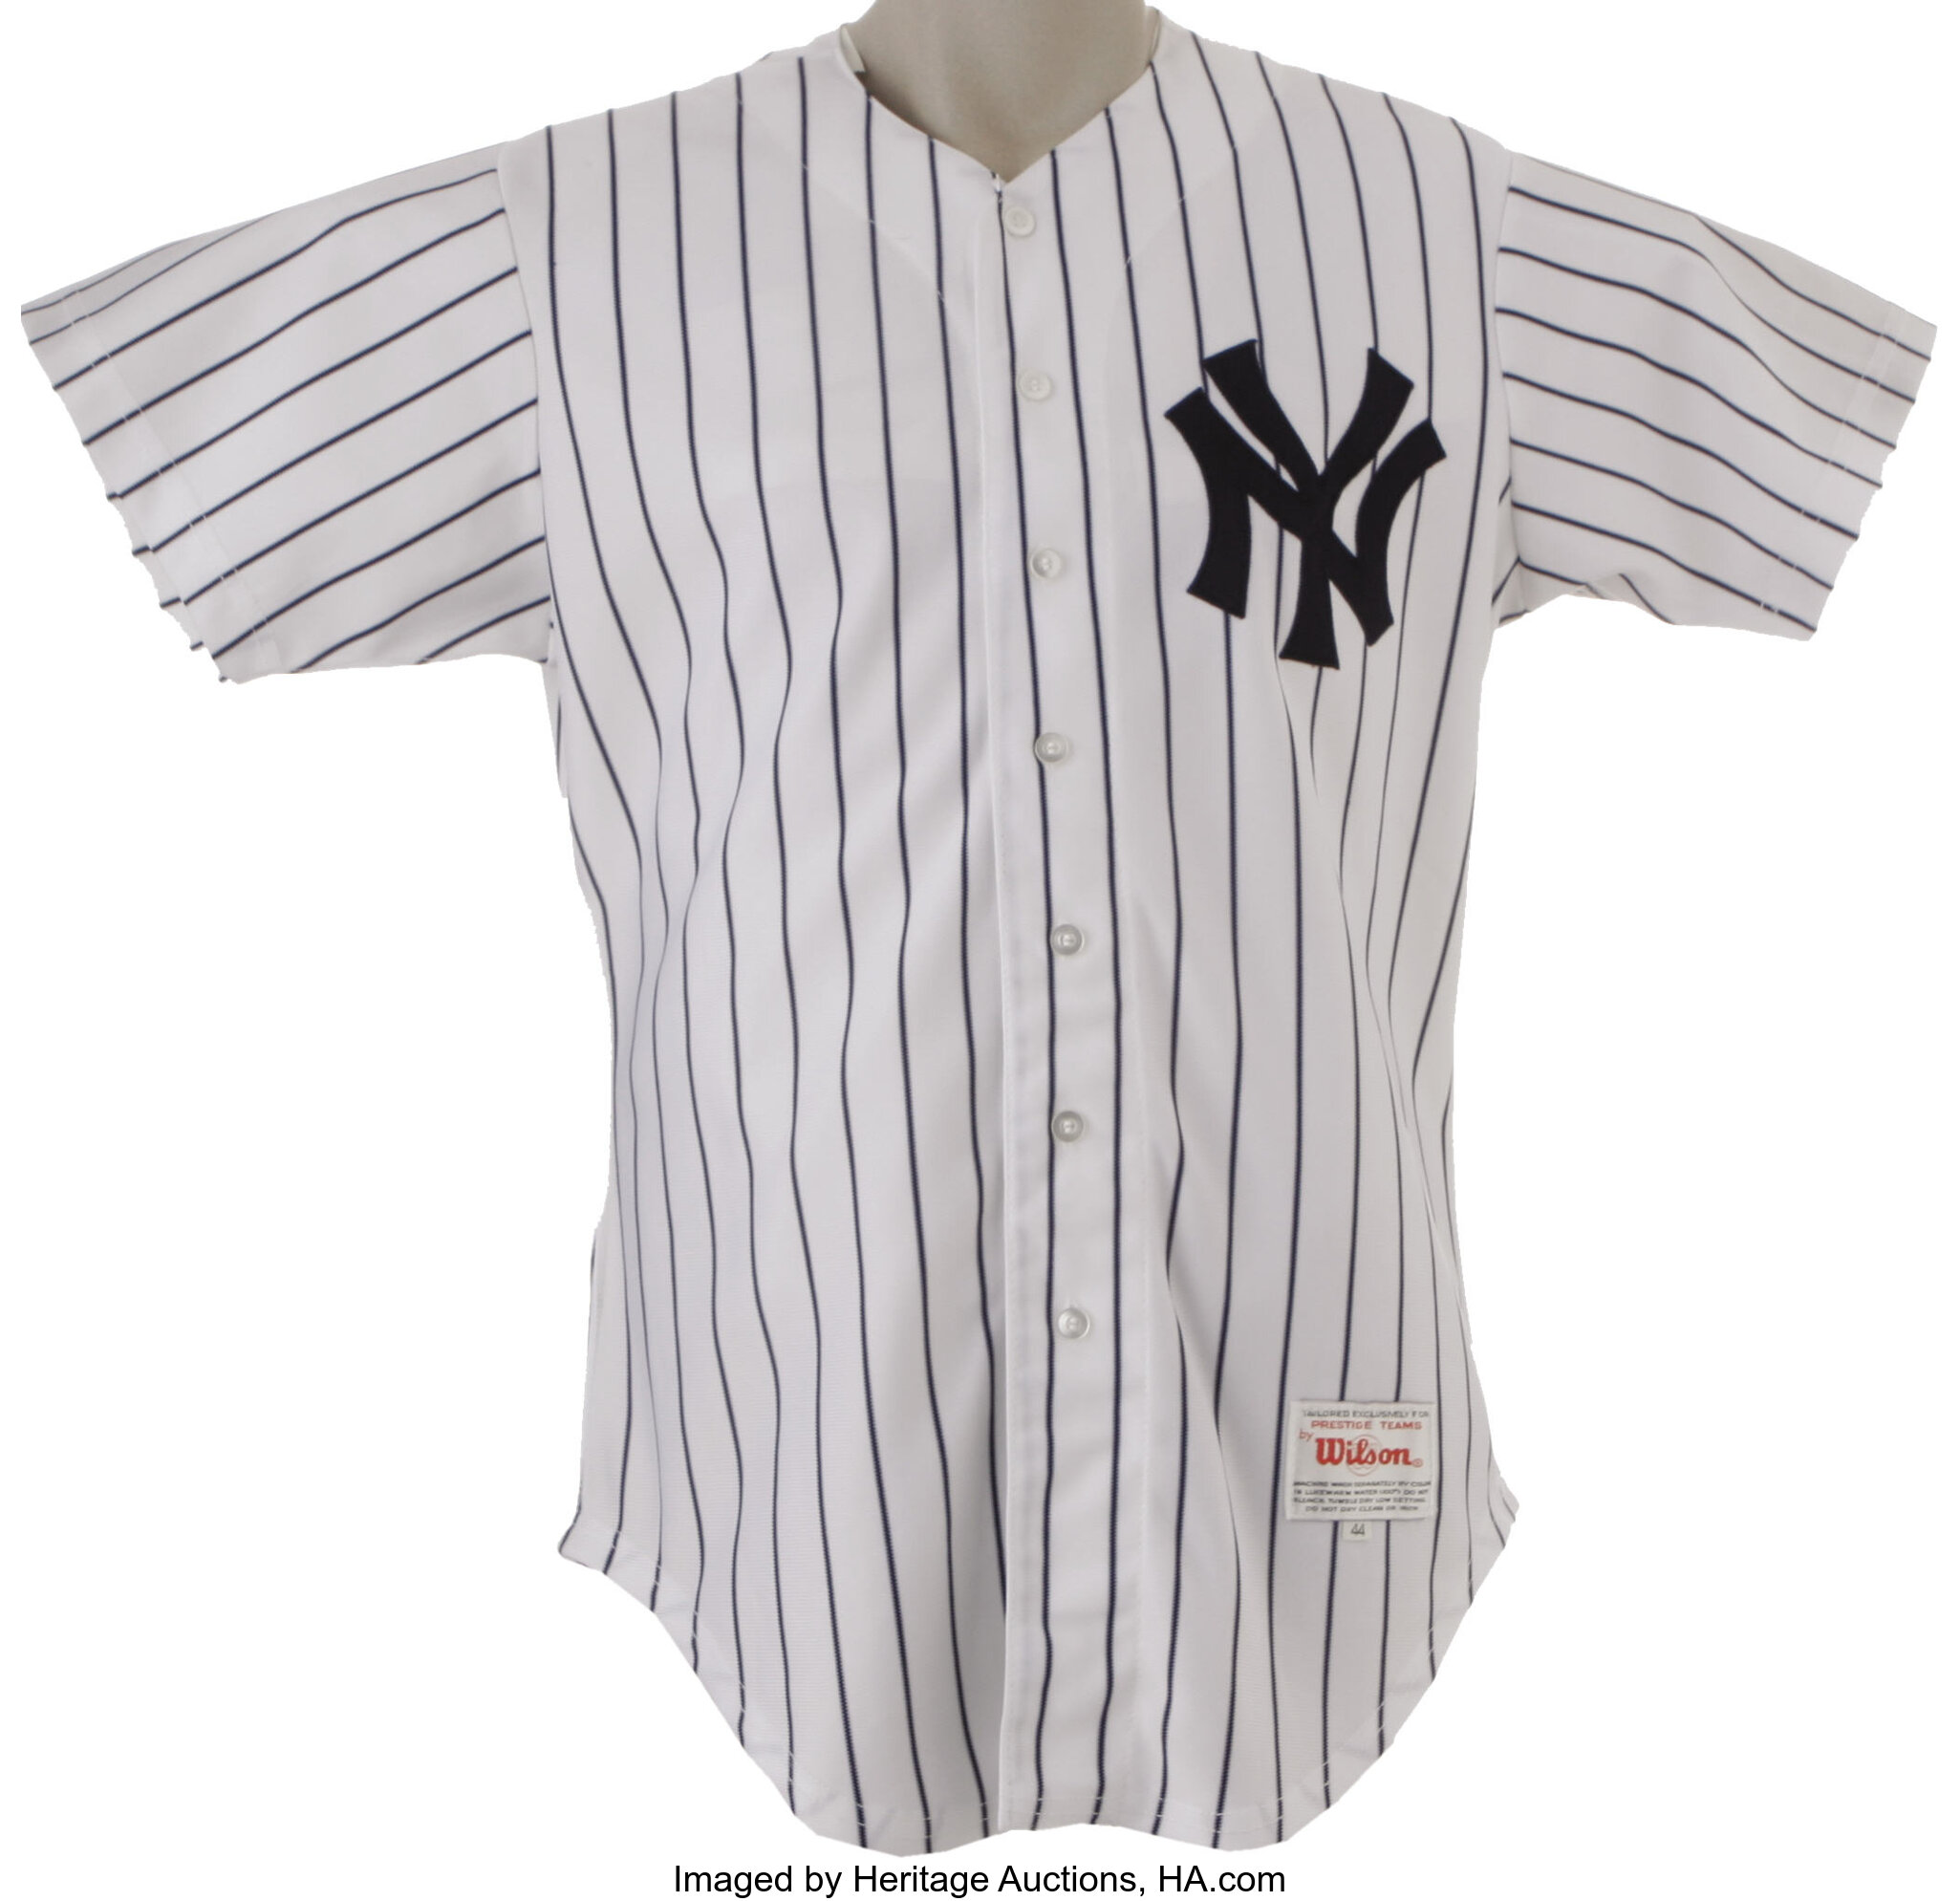 1990 Joe DiMaggio Old Timers Day Worn Jersey. Returning to the